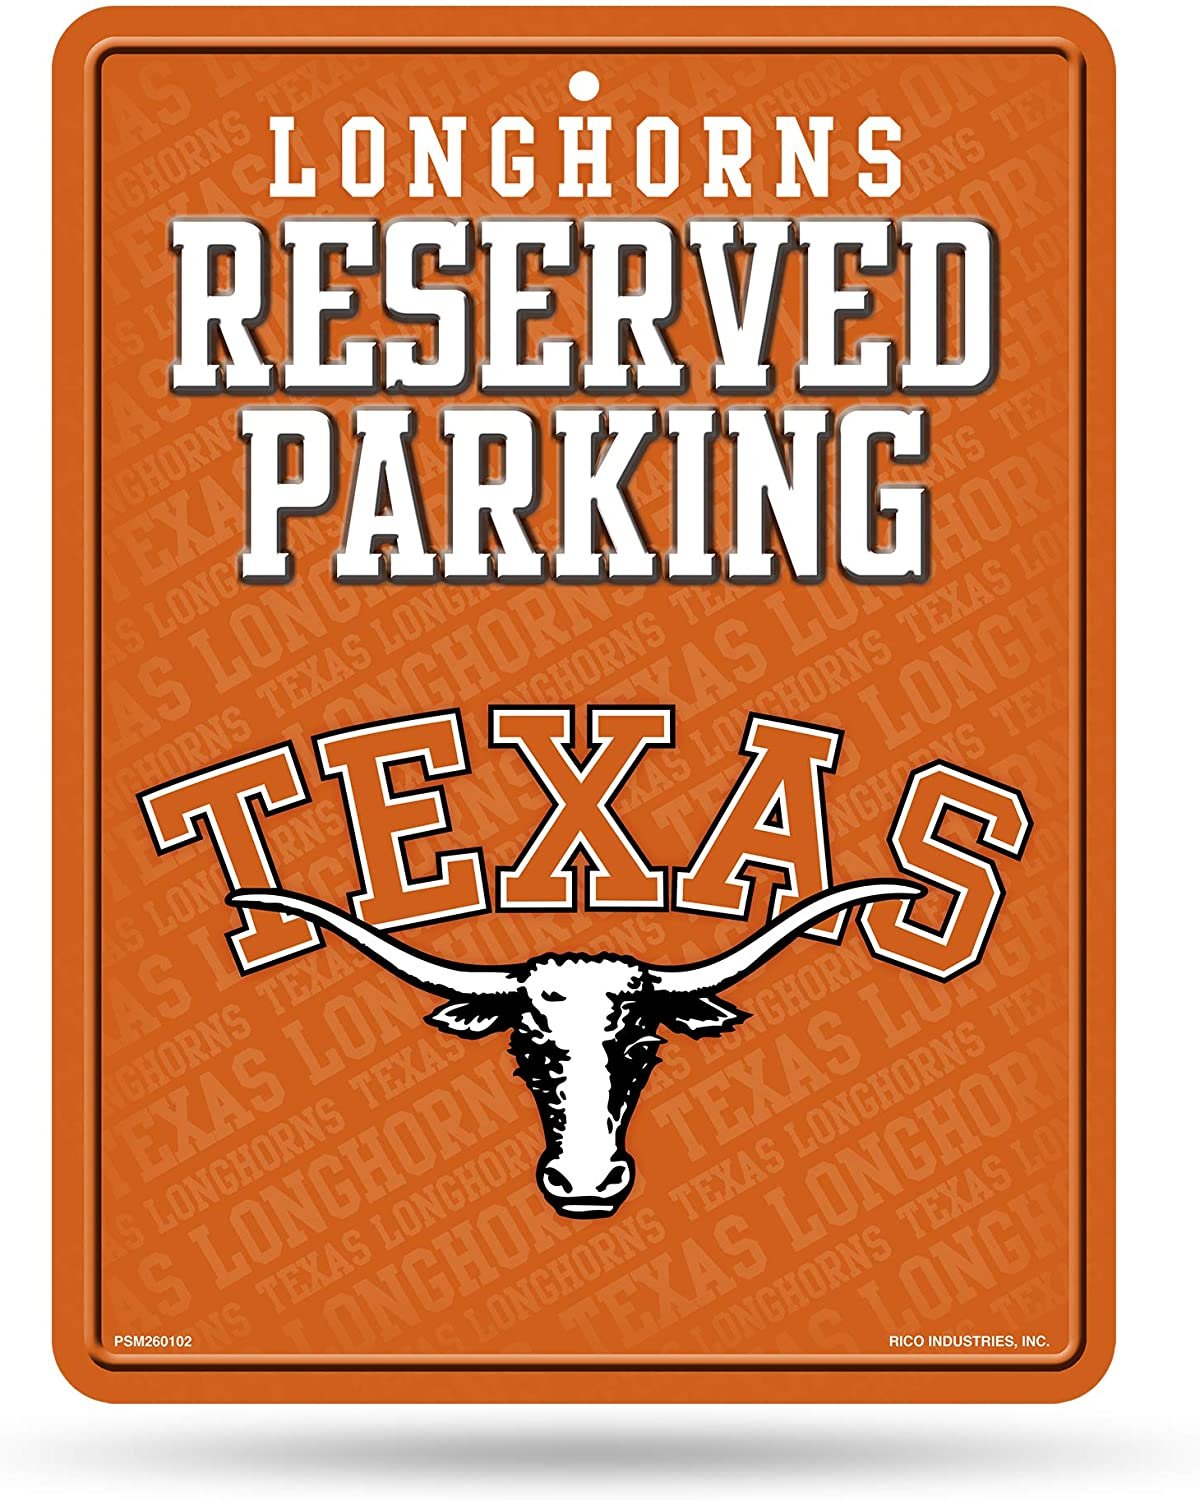 University of Texas Longhorns Metal Parking Sign, Reserved, 8.5 x 11 Inch, High Resolution